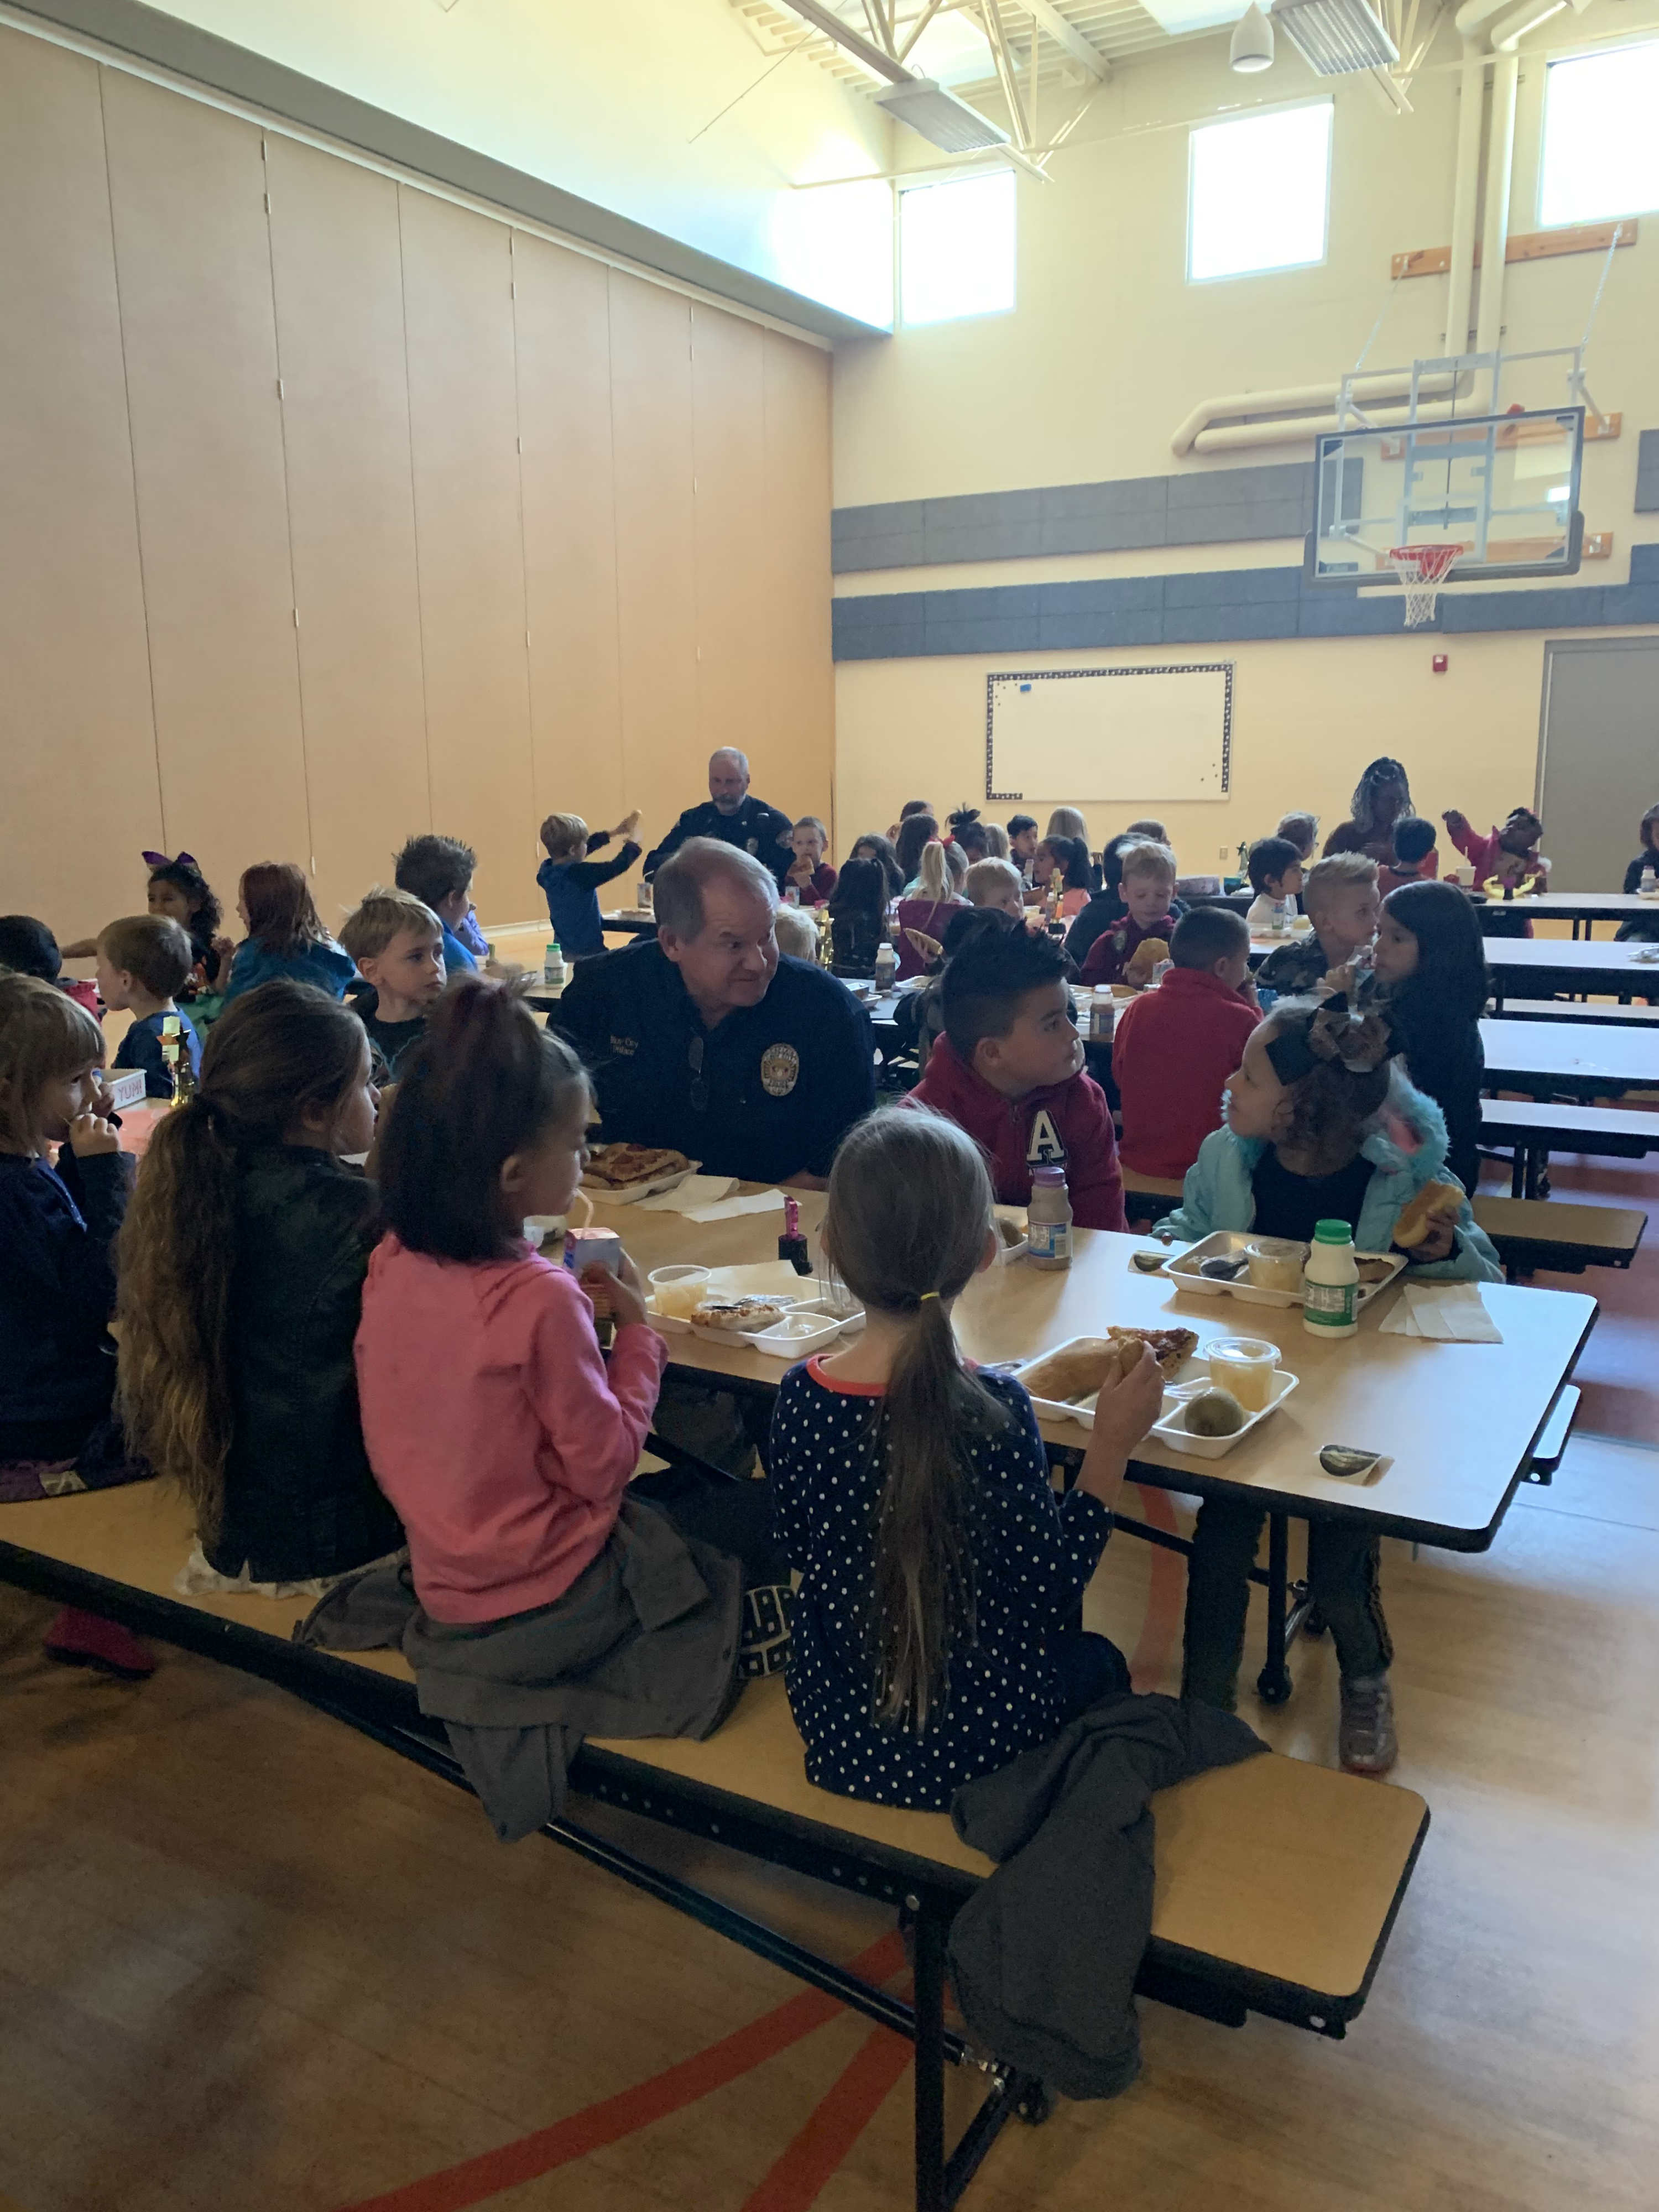 Kindergarteners with Roy City Police Department Eating Lunch